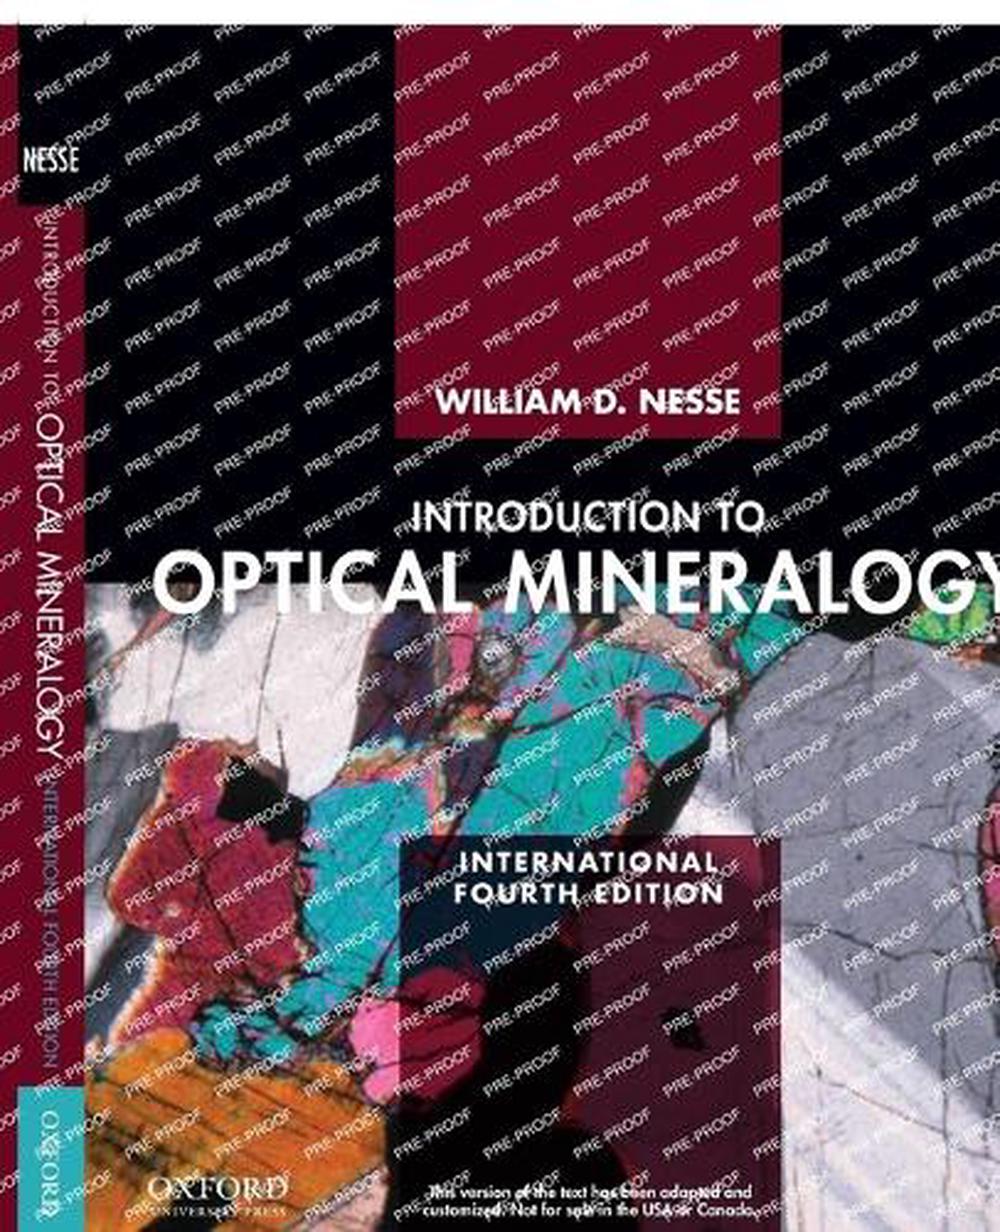 Introduction to mineralogy nesse pdf free download airwolf ringtone mp3 free download